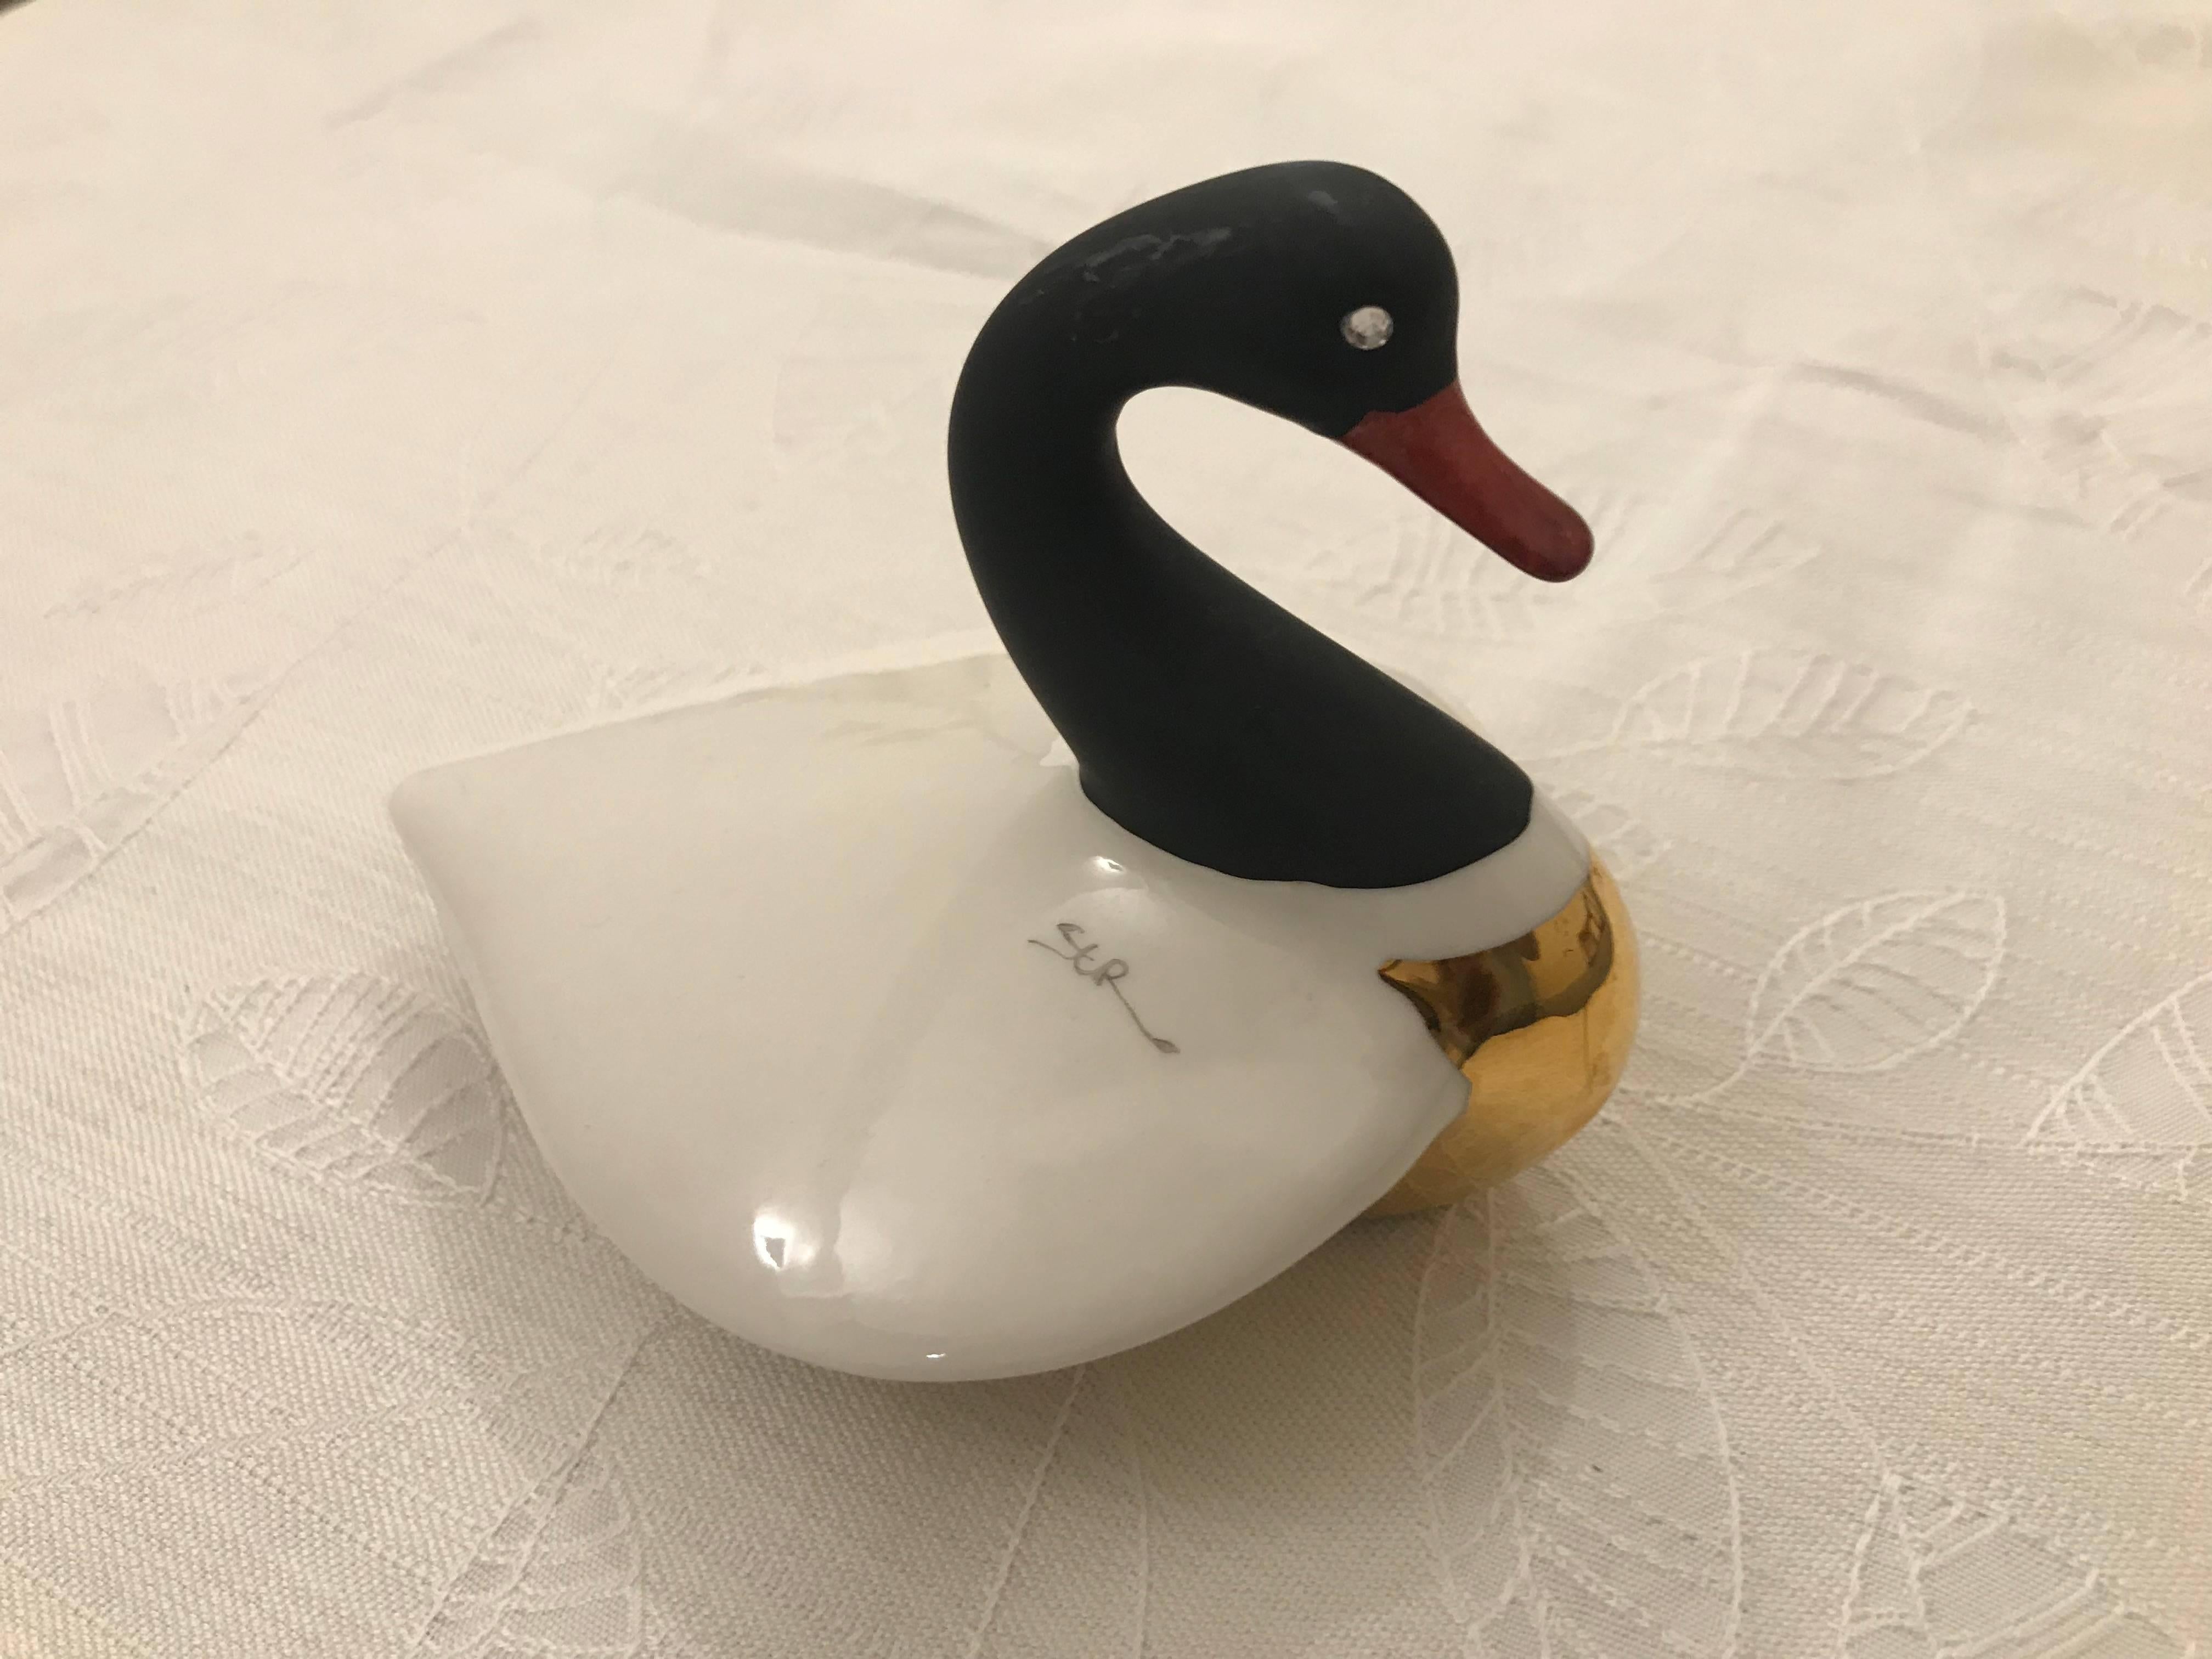 Beautiful small porcelain duck / swan by Capodimonte, signed.

INTERNATIONAL SHIPPING
Our transportation of antique furniture and items is executed with utmost care and with personal flavour in order pick up or bring your precious order.
 
APPROVED